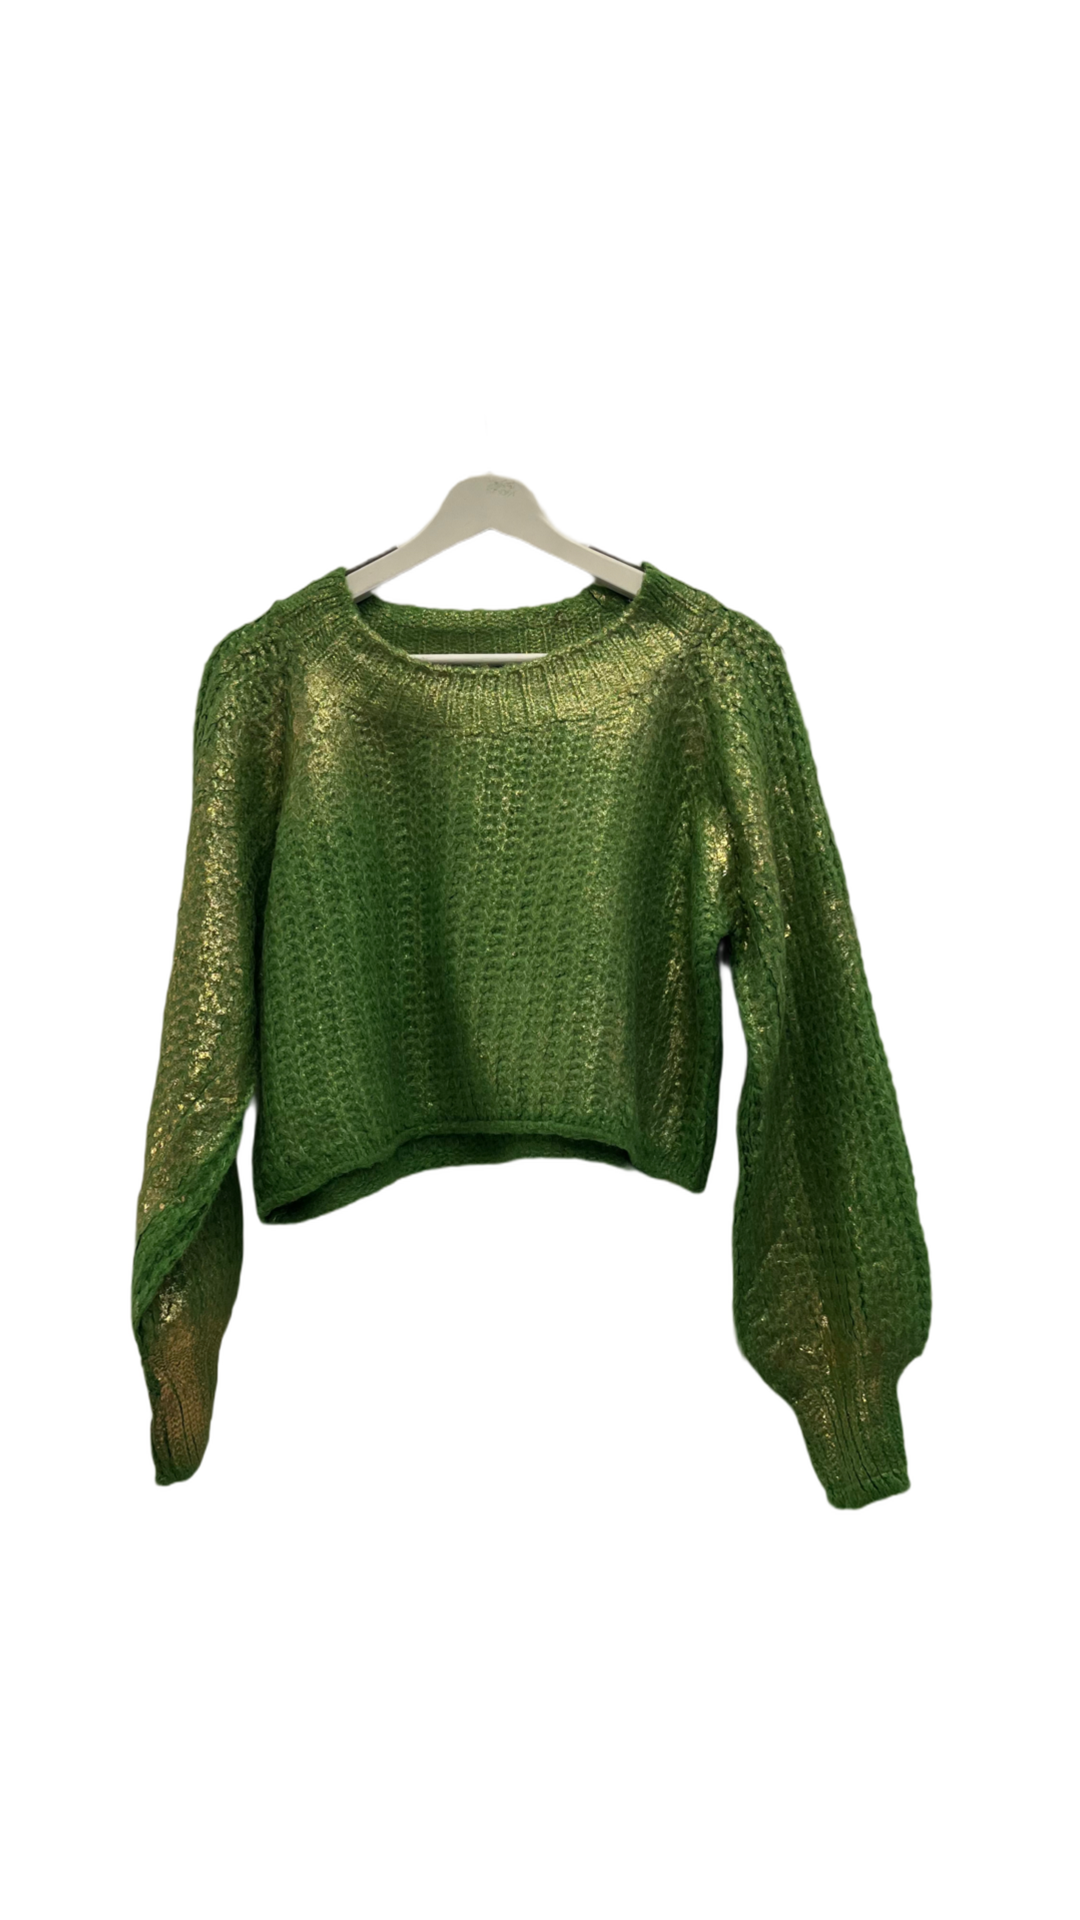 Glenna Gold Painted Knit sweater- green